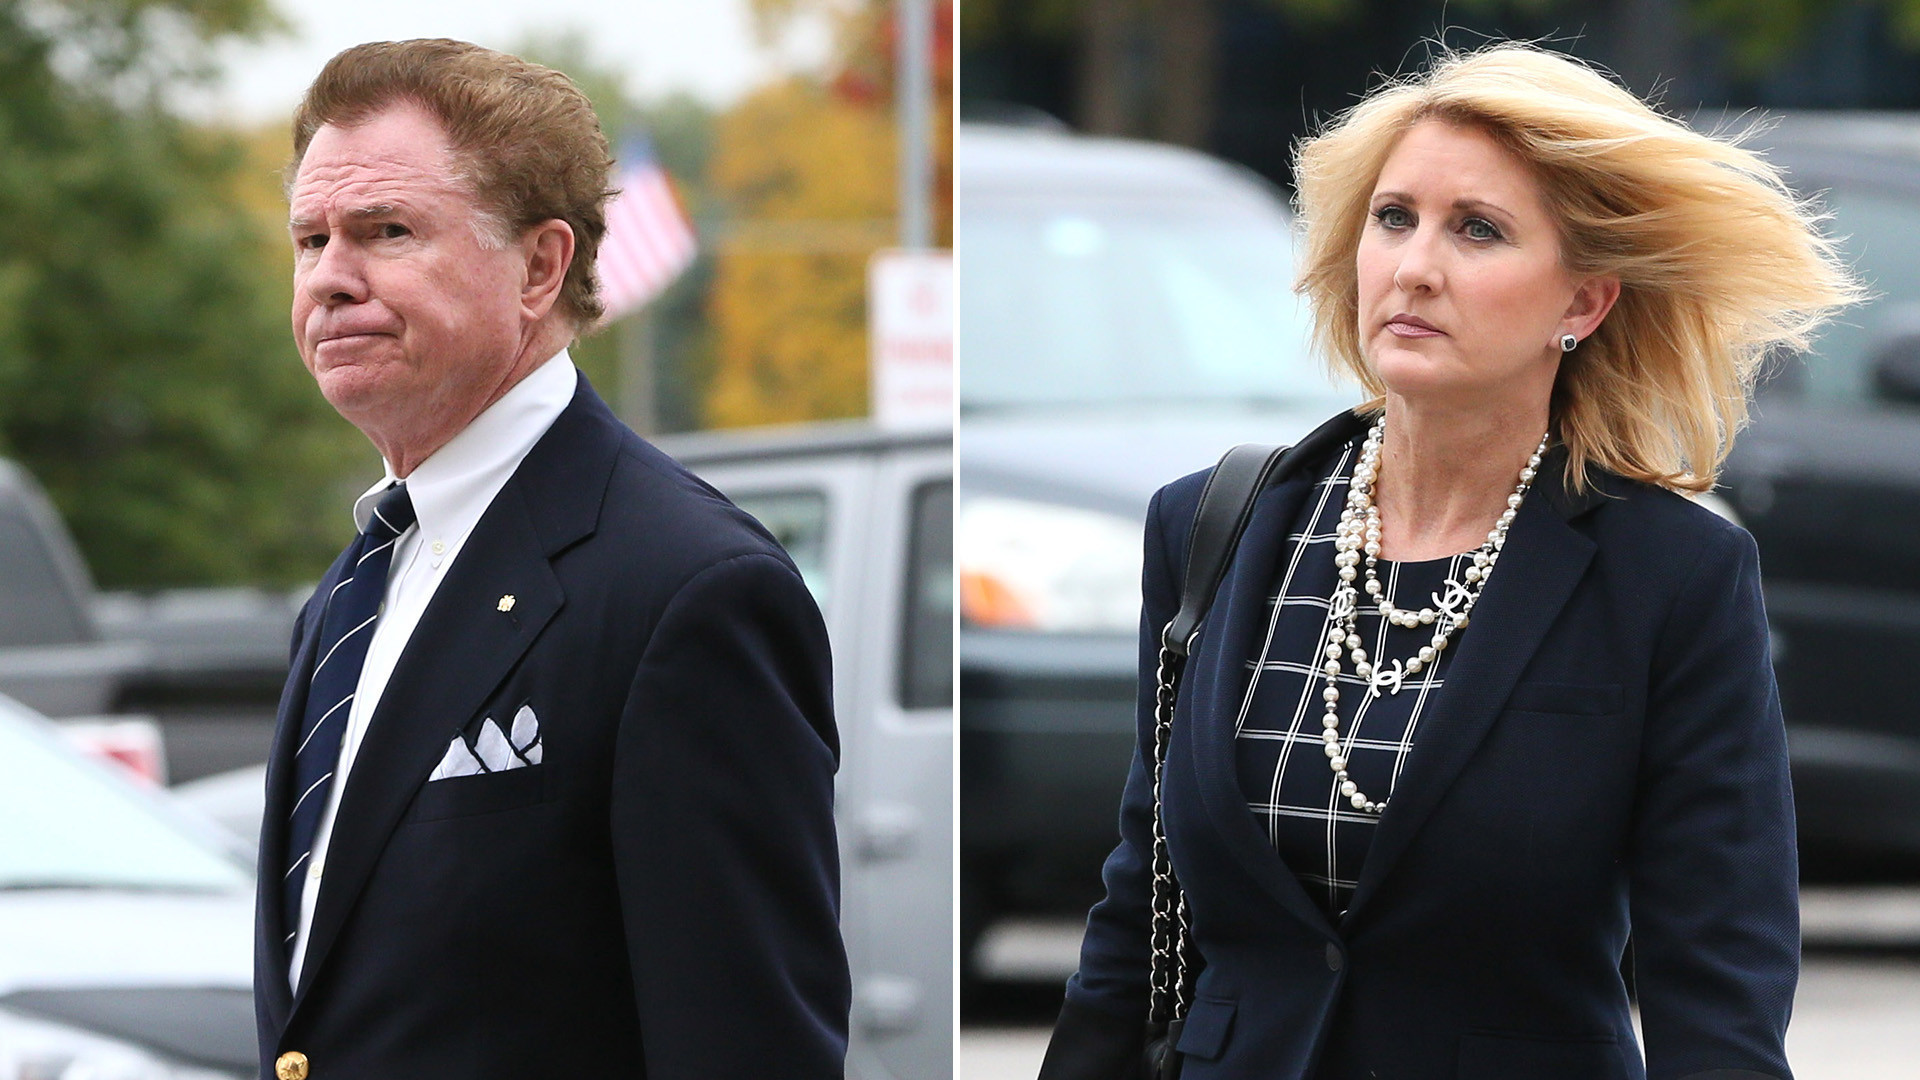 Cancer center founder's ex-wife seeks $400K/month as divorce trial opens